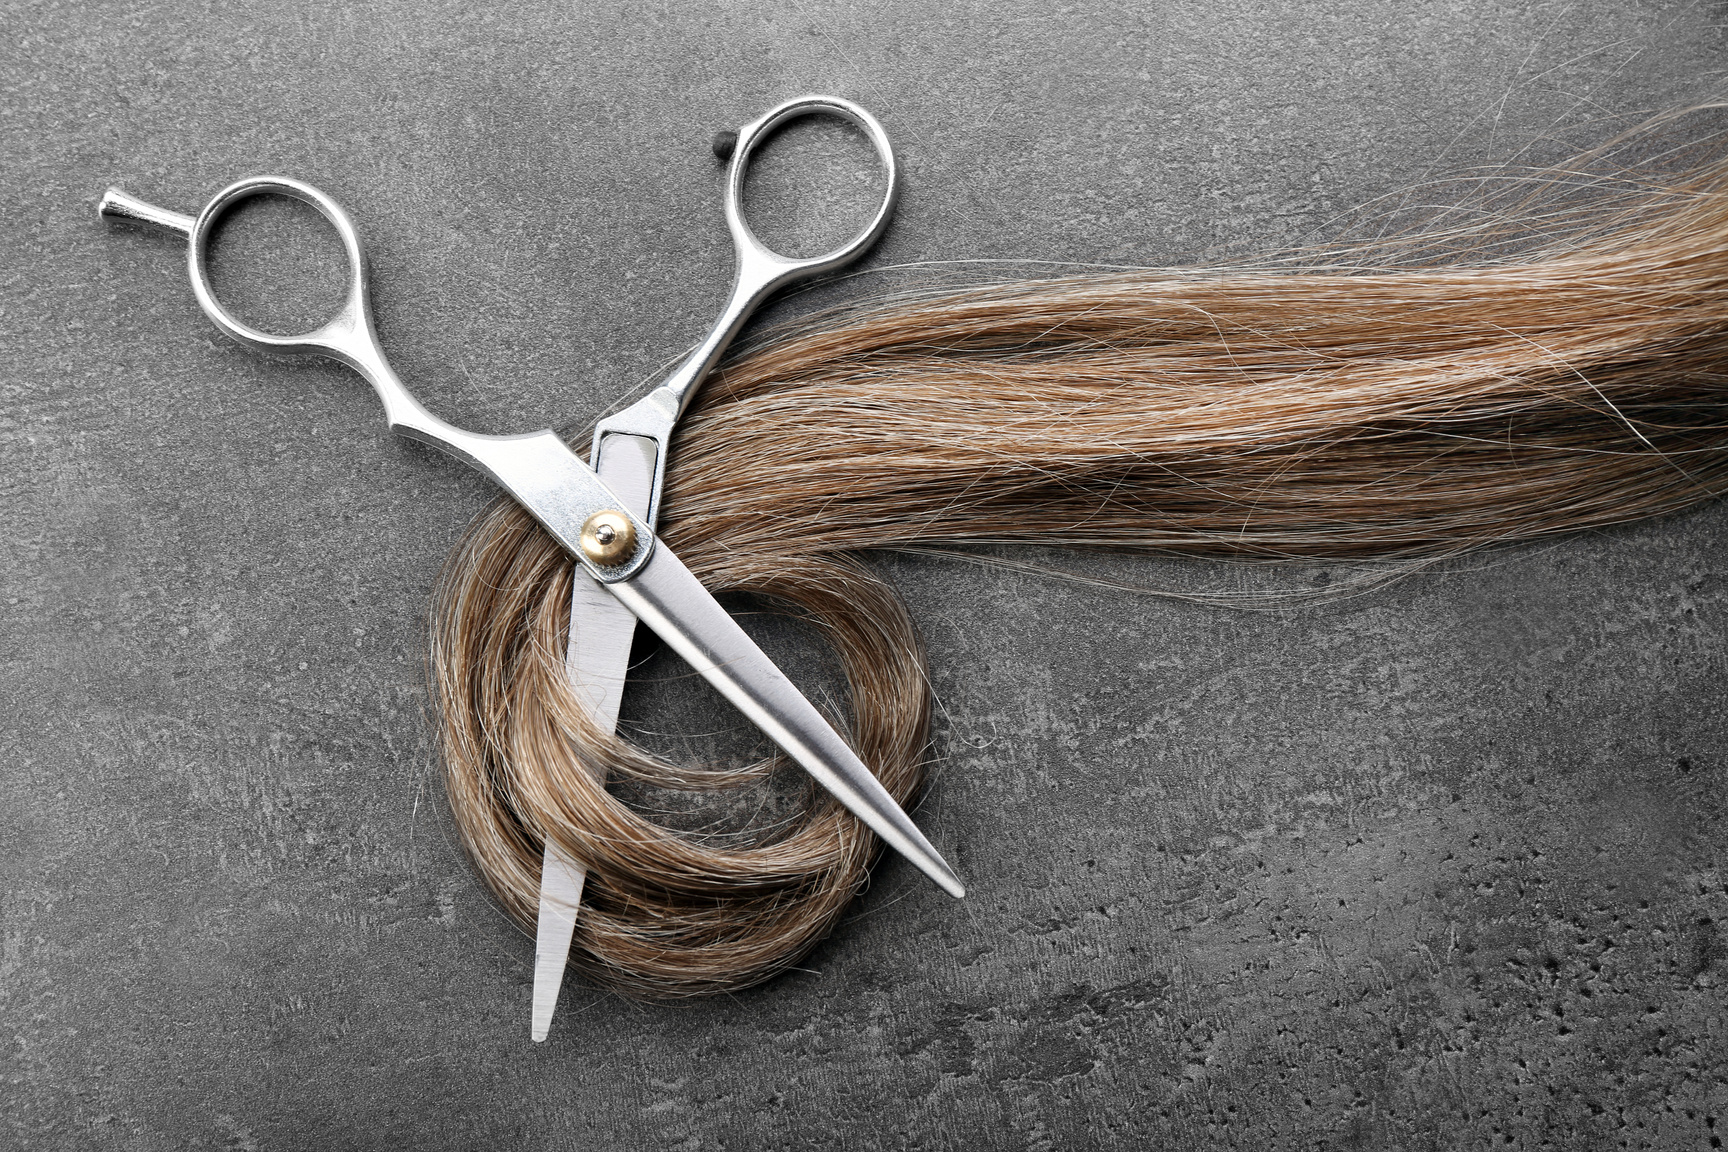 Hairdresser's Scissors with Strand of Brown Hair 